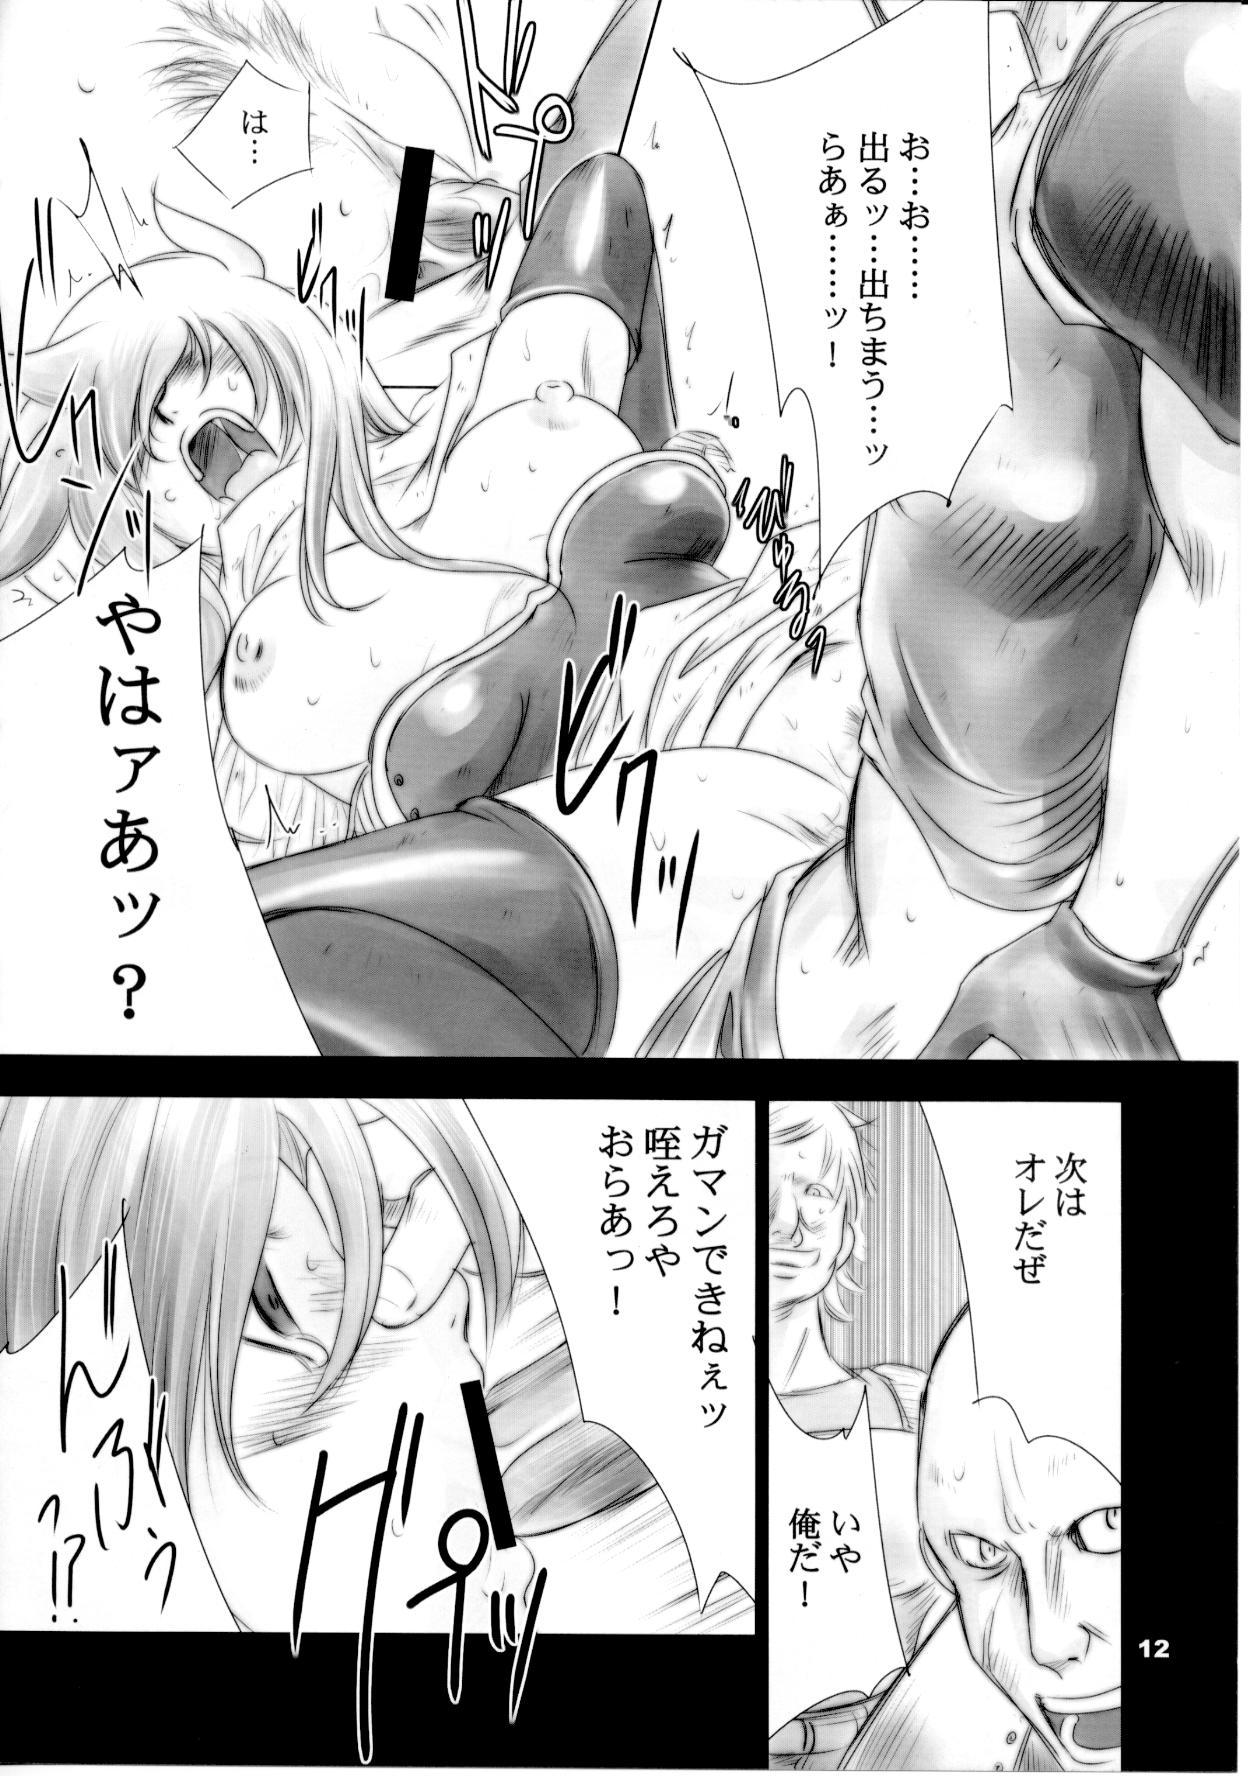 Shaven Recollection of Retisha P22-23 Scandal - Page 11